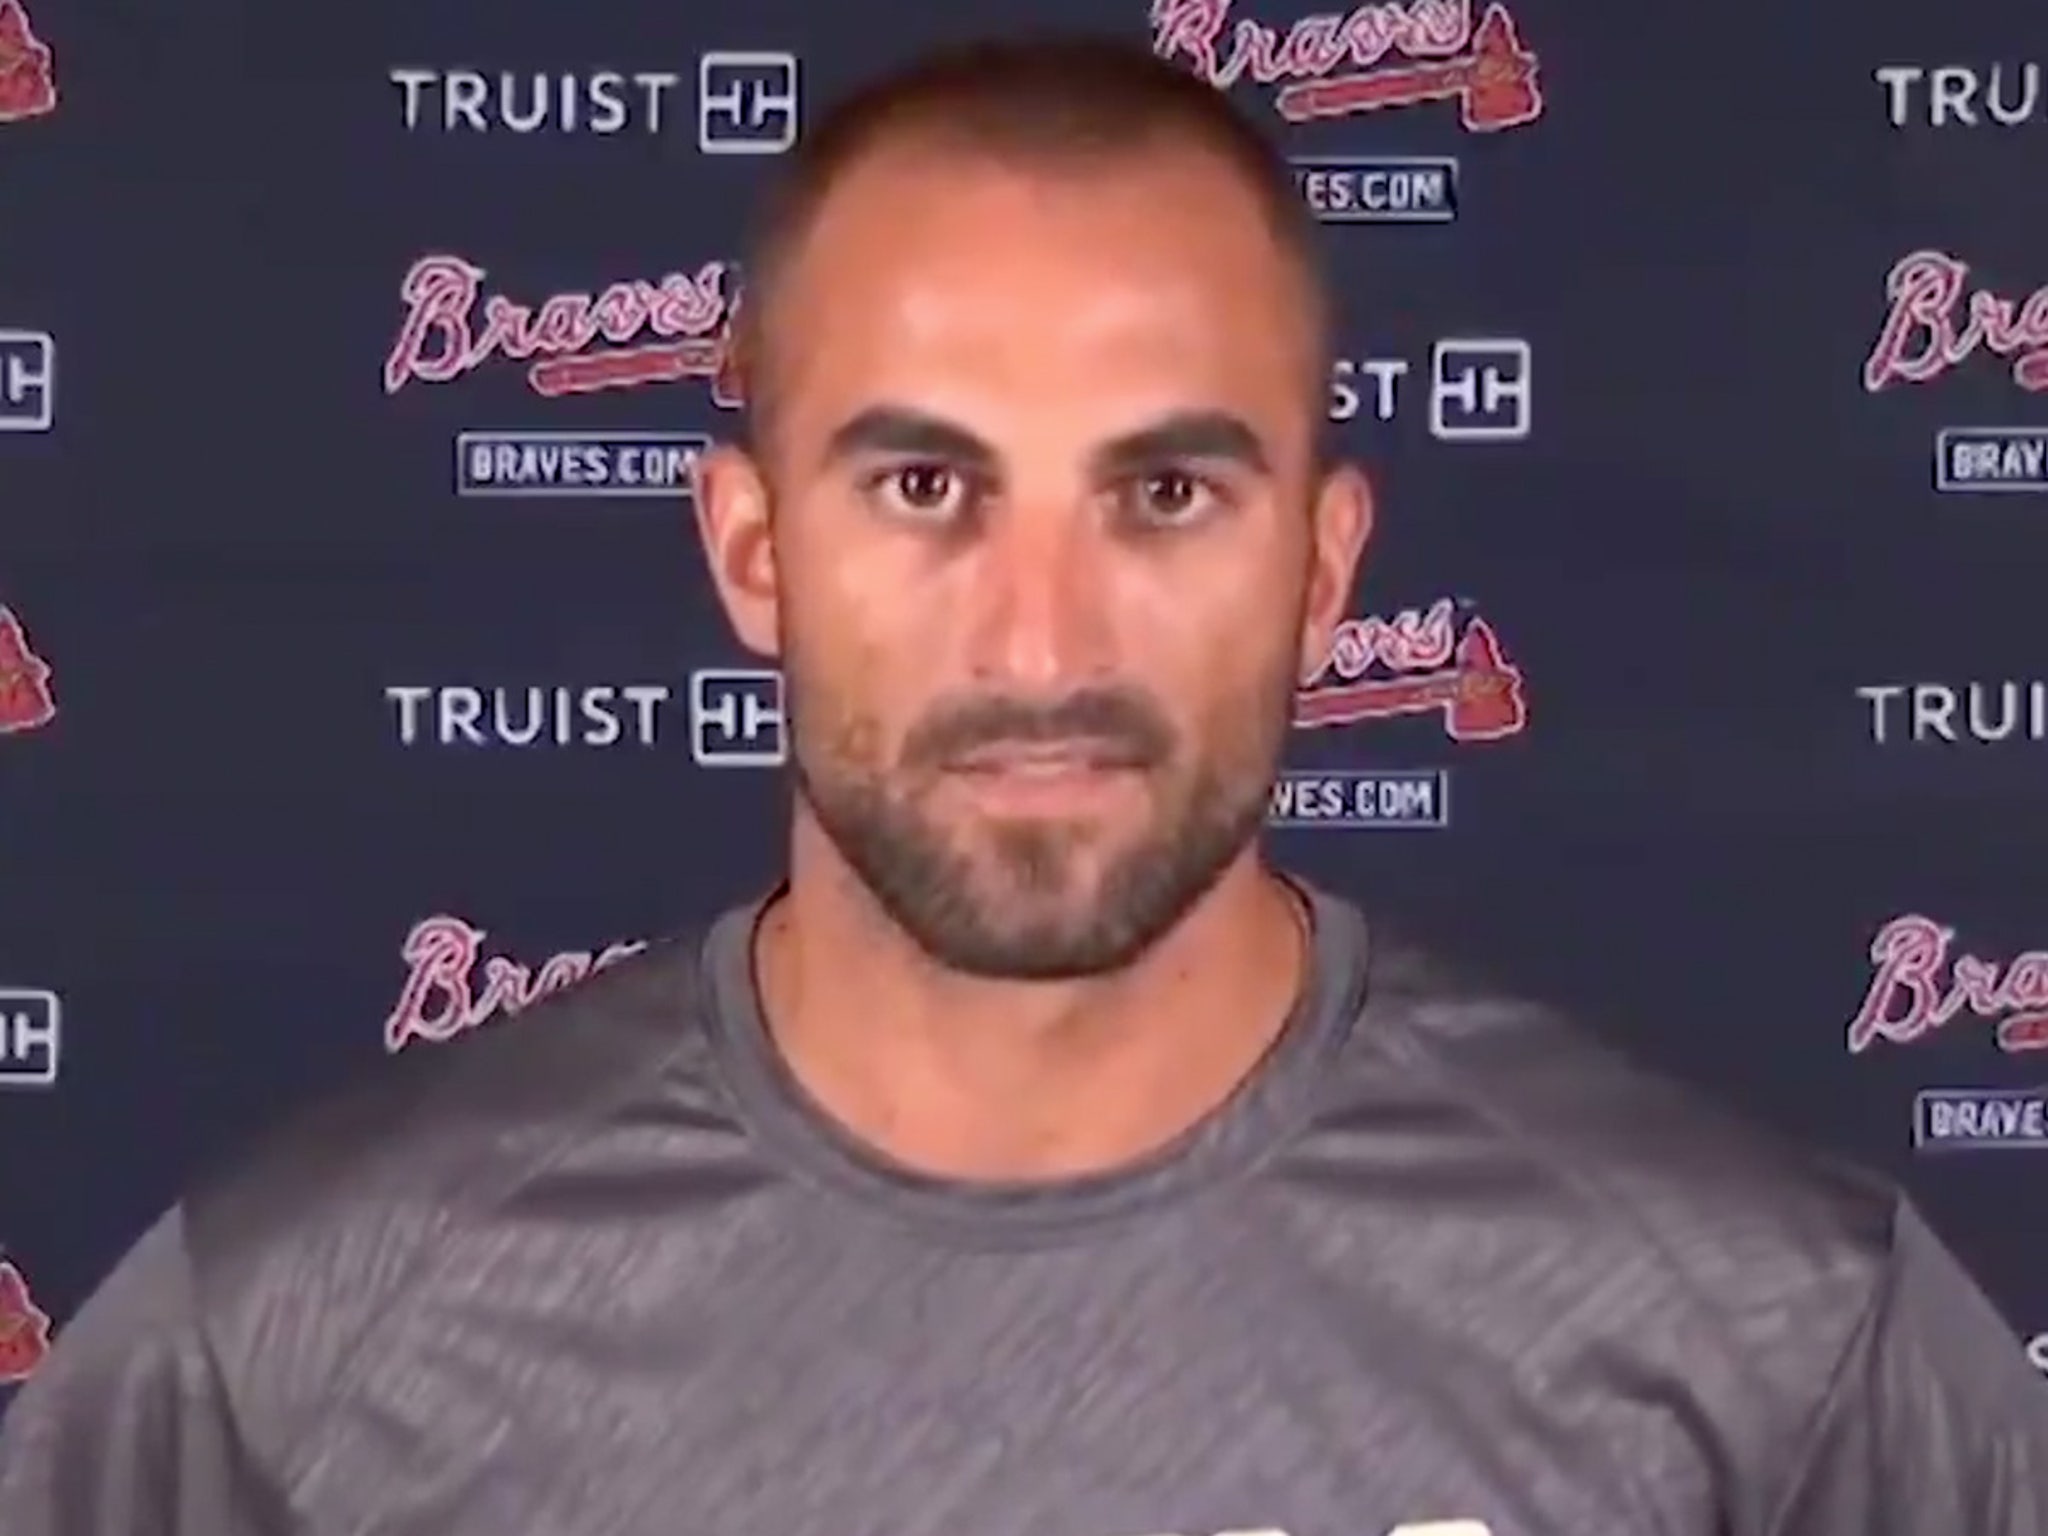 Braves place Markakis on COVID-19 IL, promote Pache to make debut – WSB-TV  Channel 2 - Atlanta